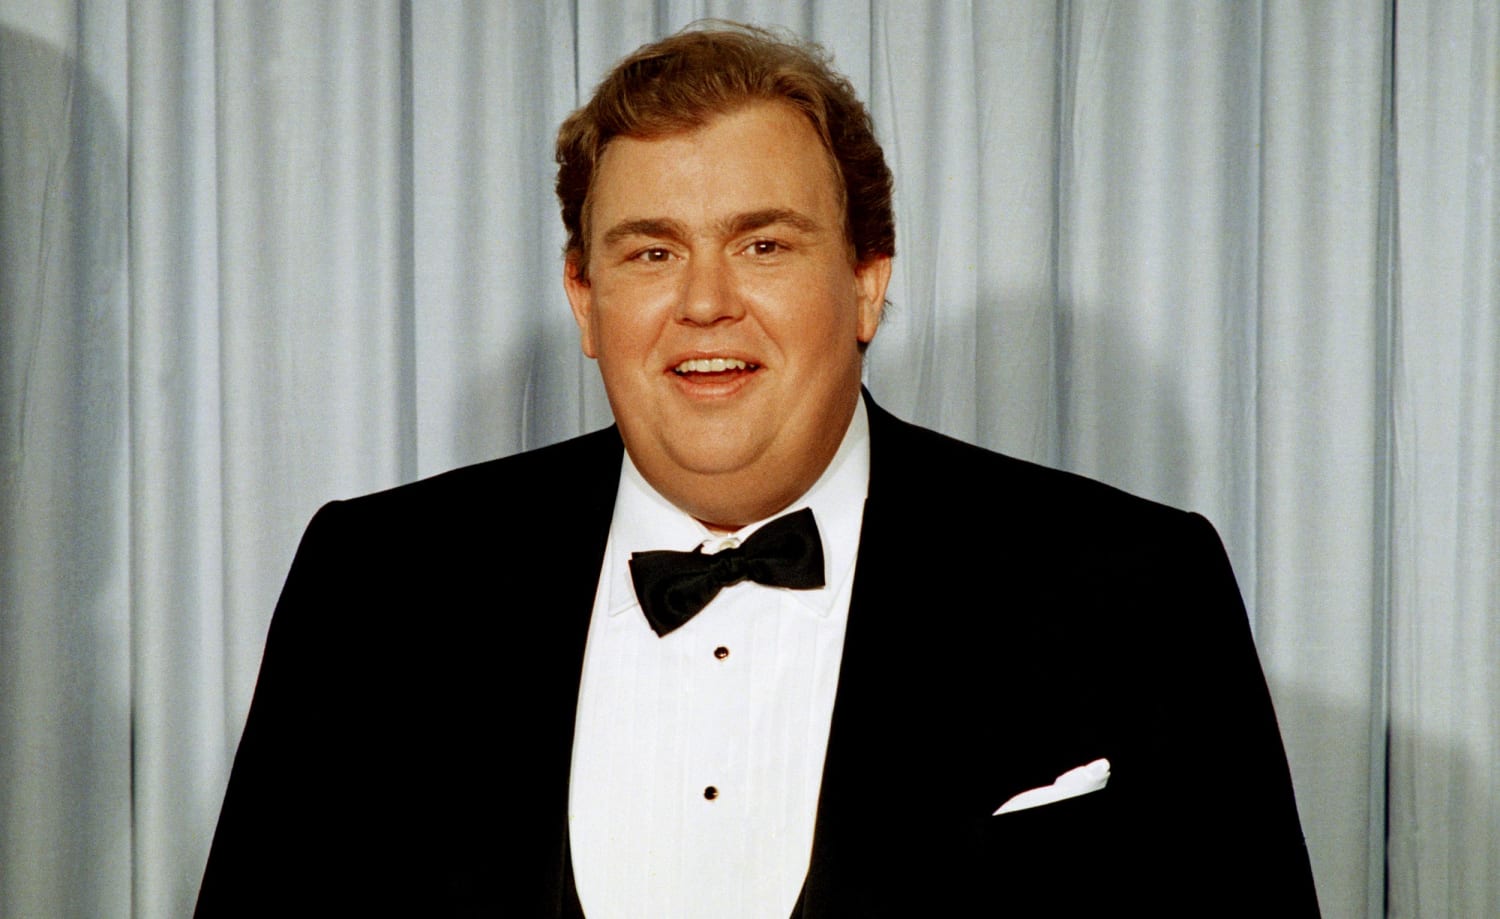 John Candy's children honor their father on the 30th anniversary of his death